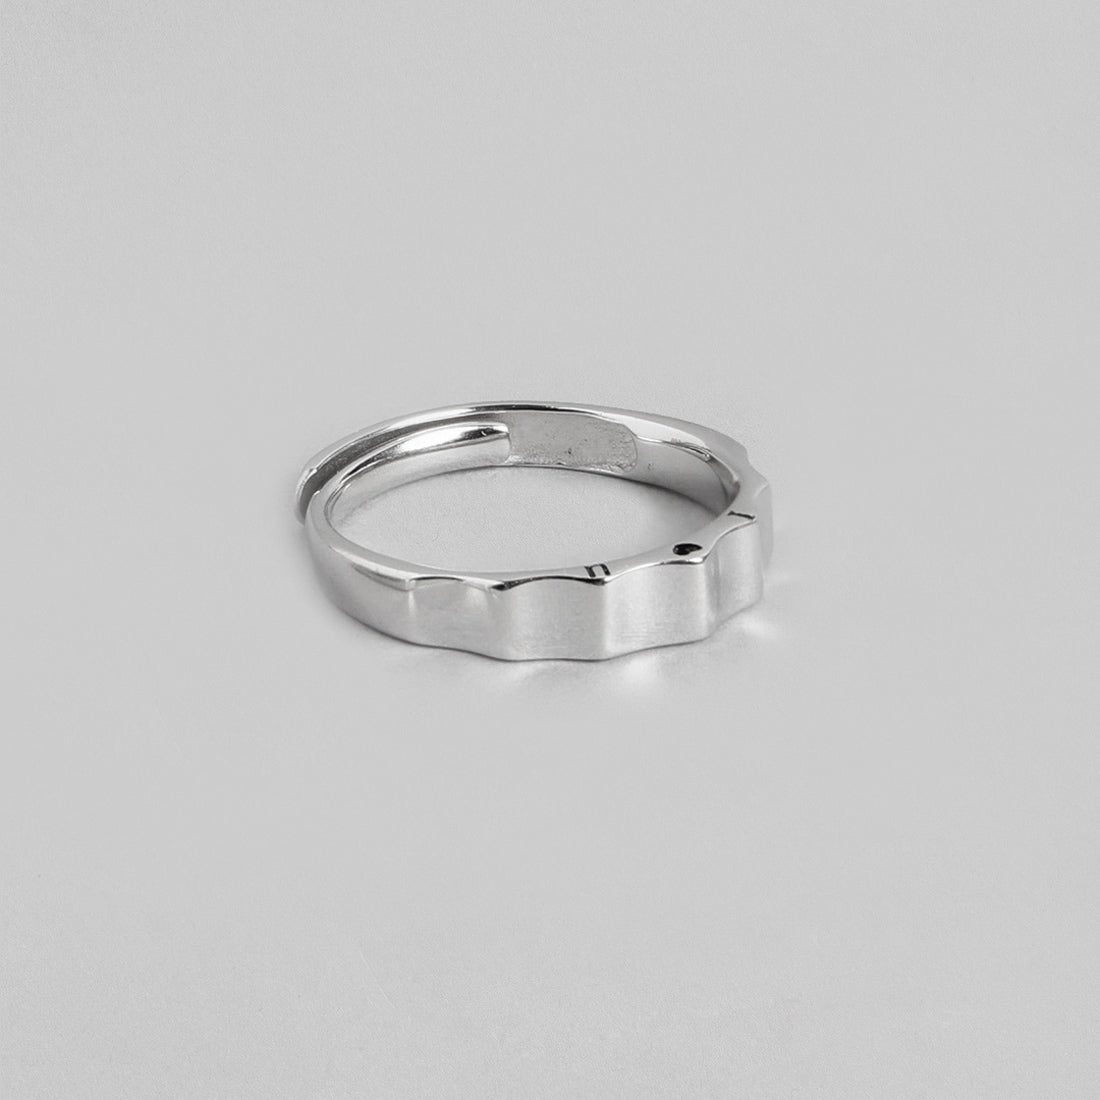 Minimalistic Rhodium Plated 925 Sterling Silver Ring For Him (Adjustable)